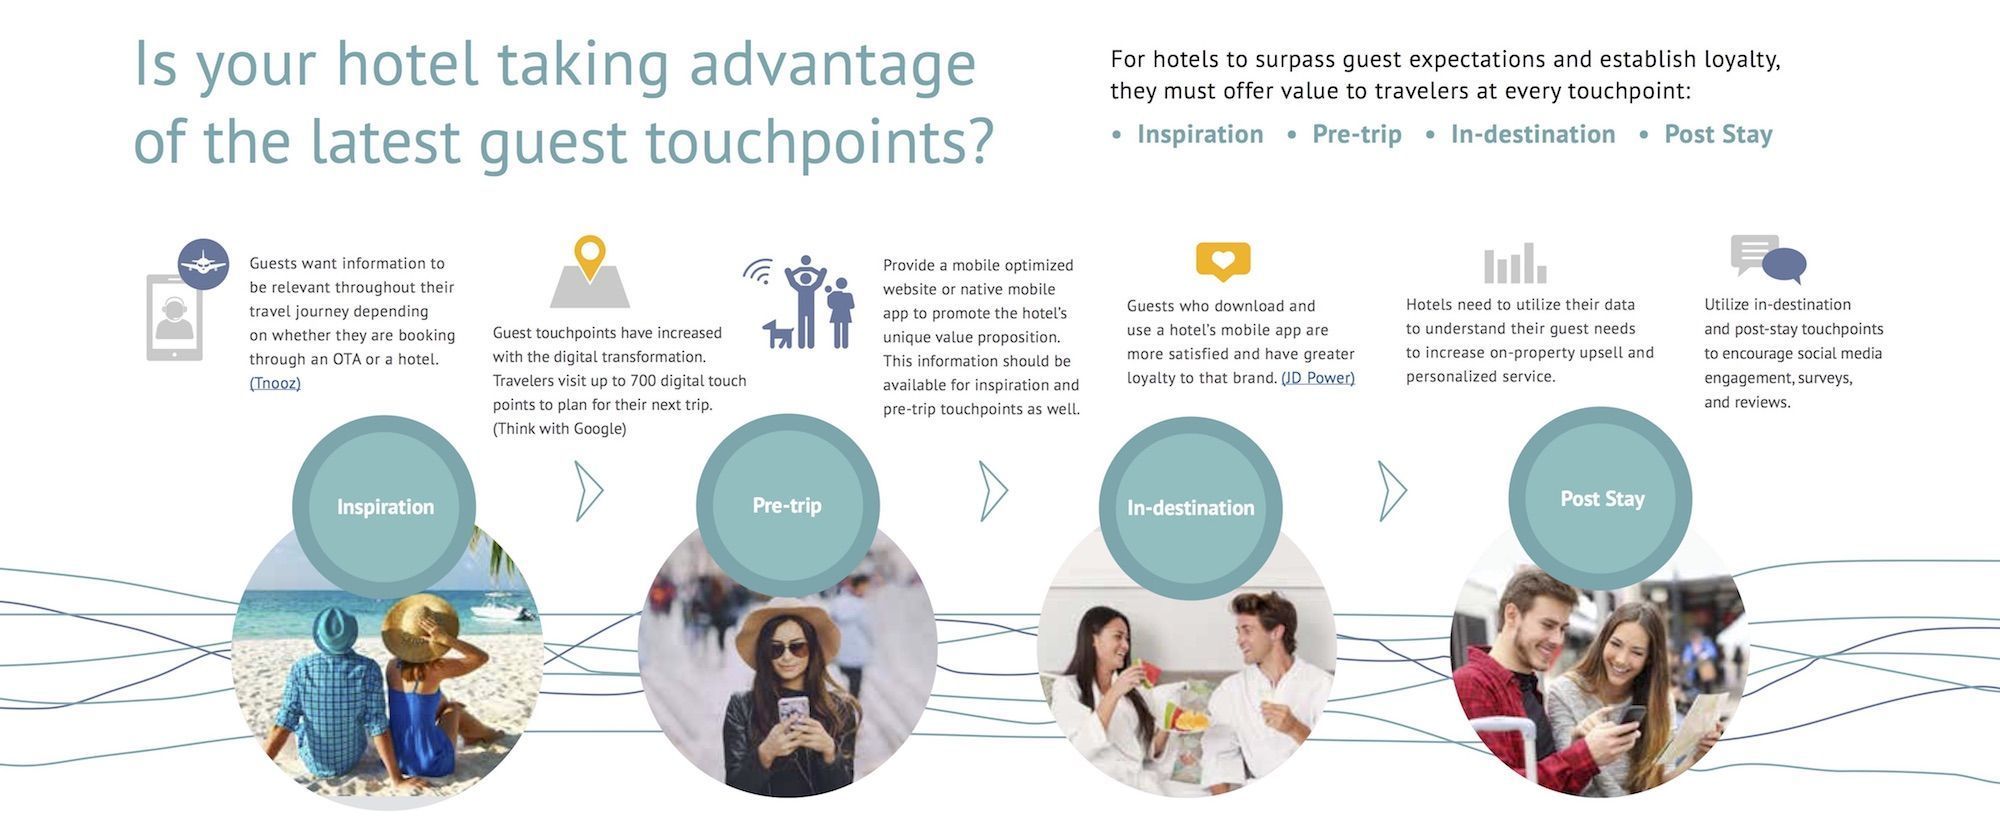 Concilio-Infographic-Guest-Touchpoints.jpg